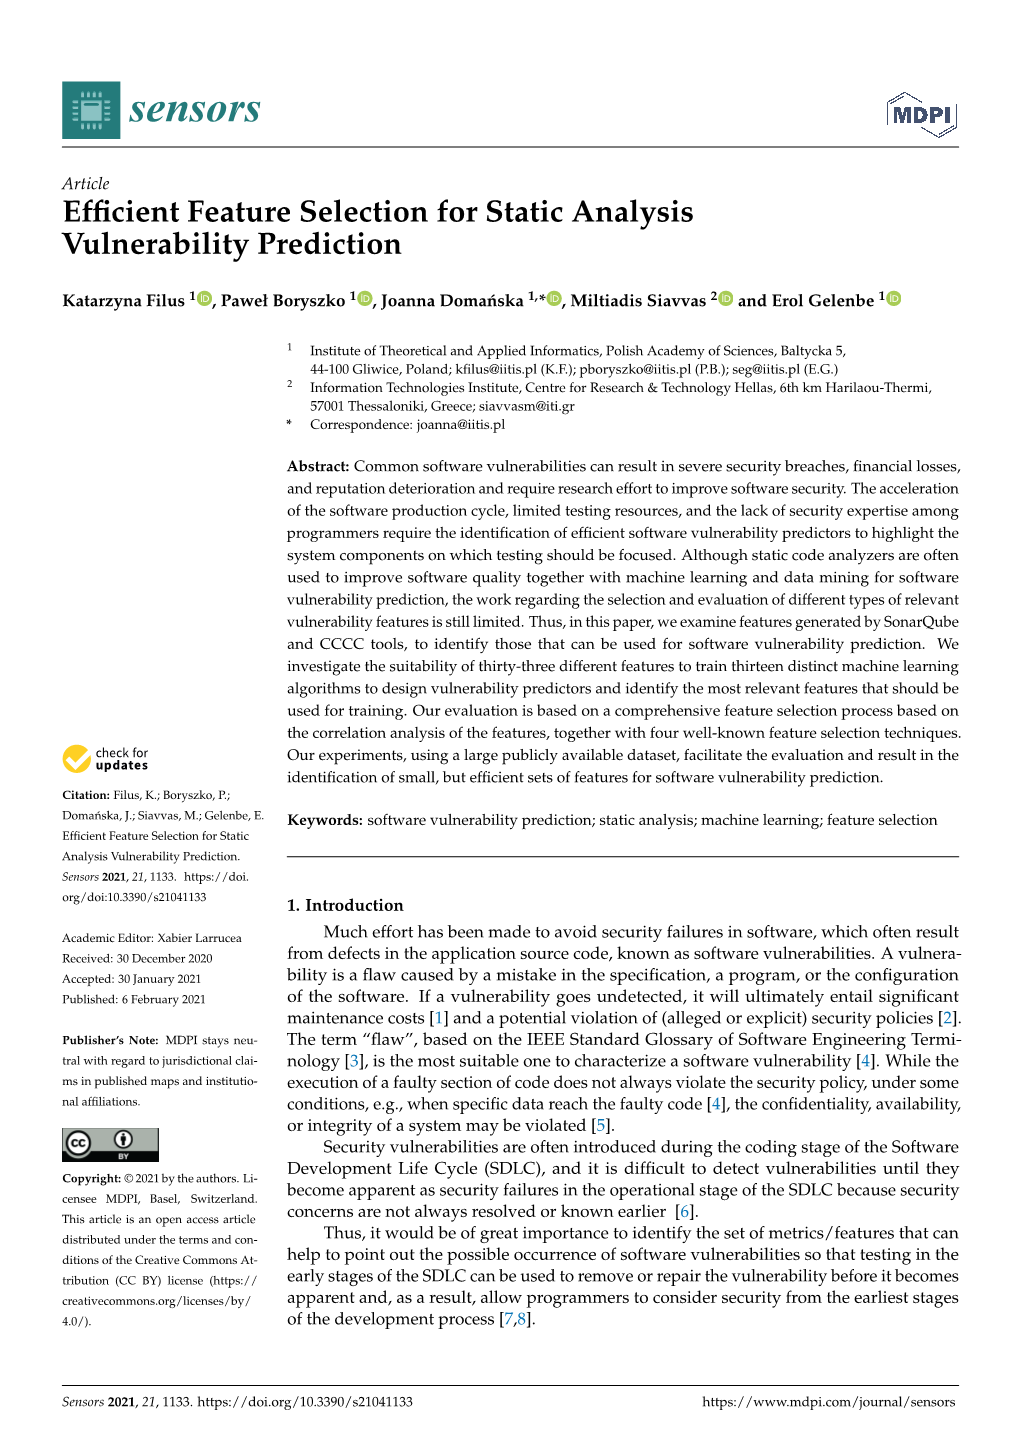 Efficient Feature Selection for Static Analysis Vulnerability Prediction